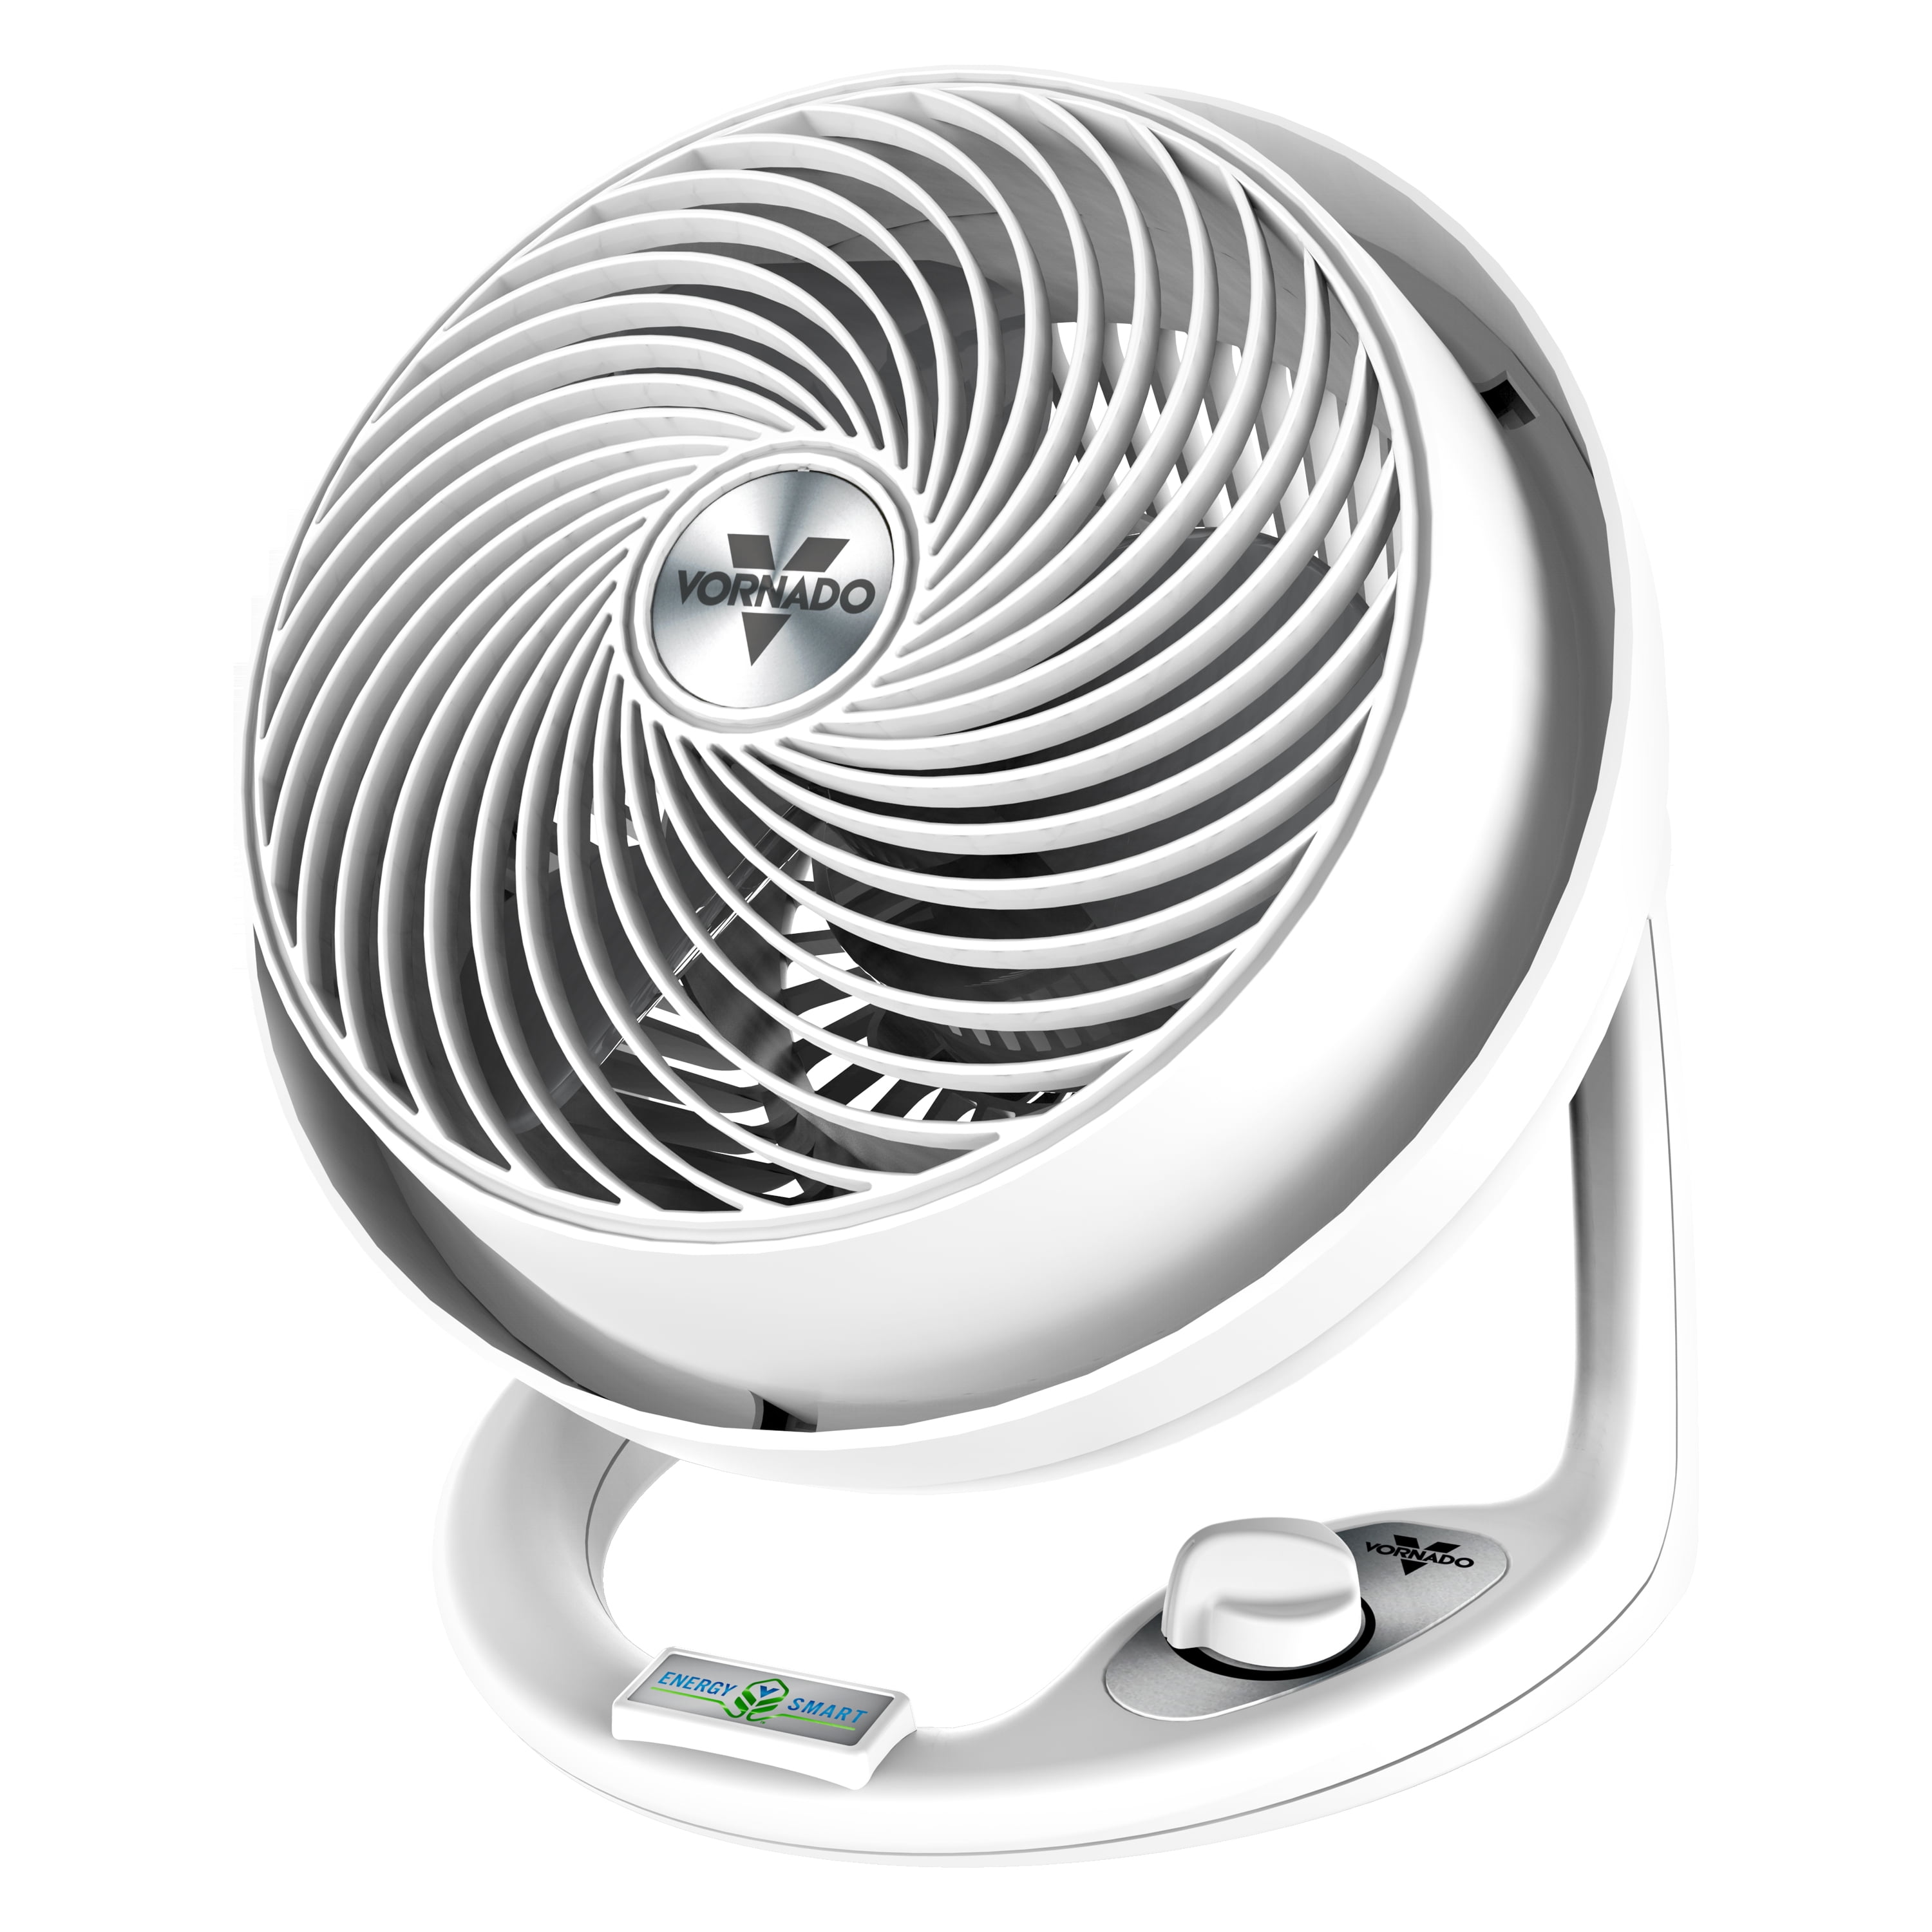 Vornado 783DC Energy Smart Full-Size Air Circulator Fan with Variable Speed Control and Adjustable Height CR1-0277-73 